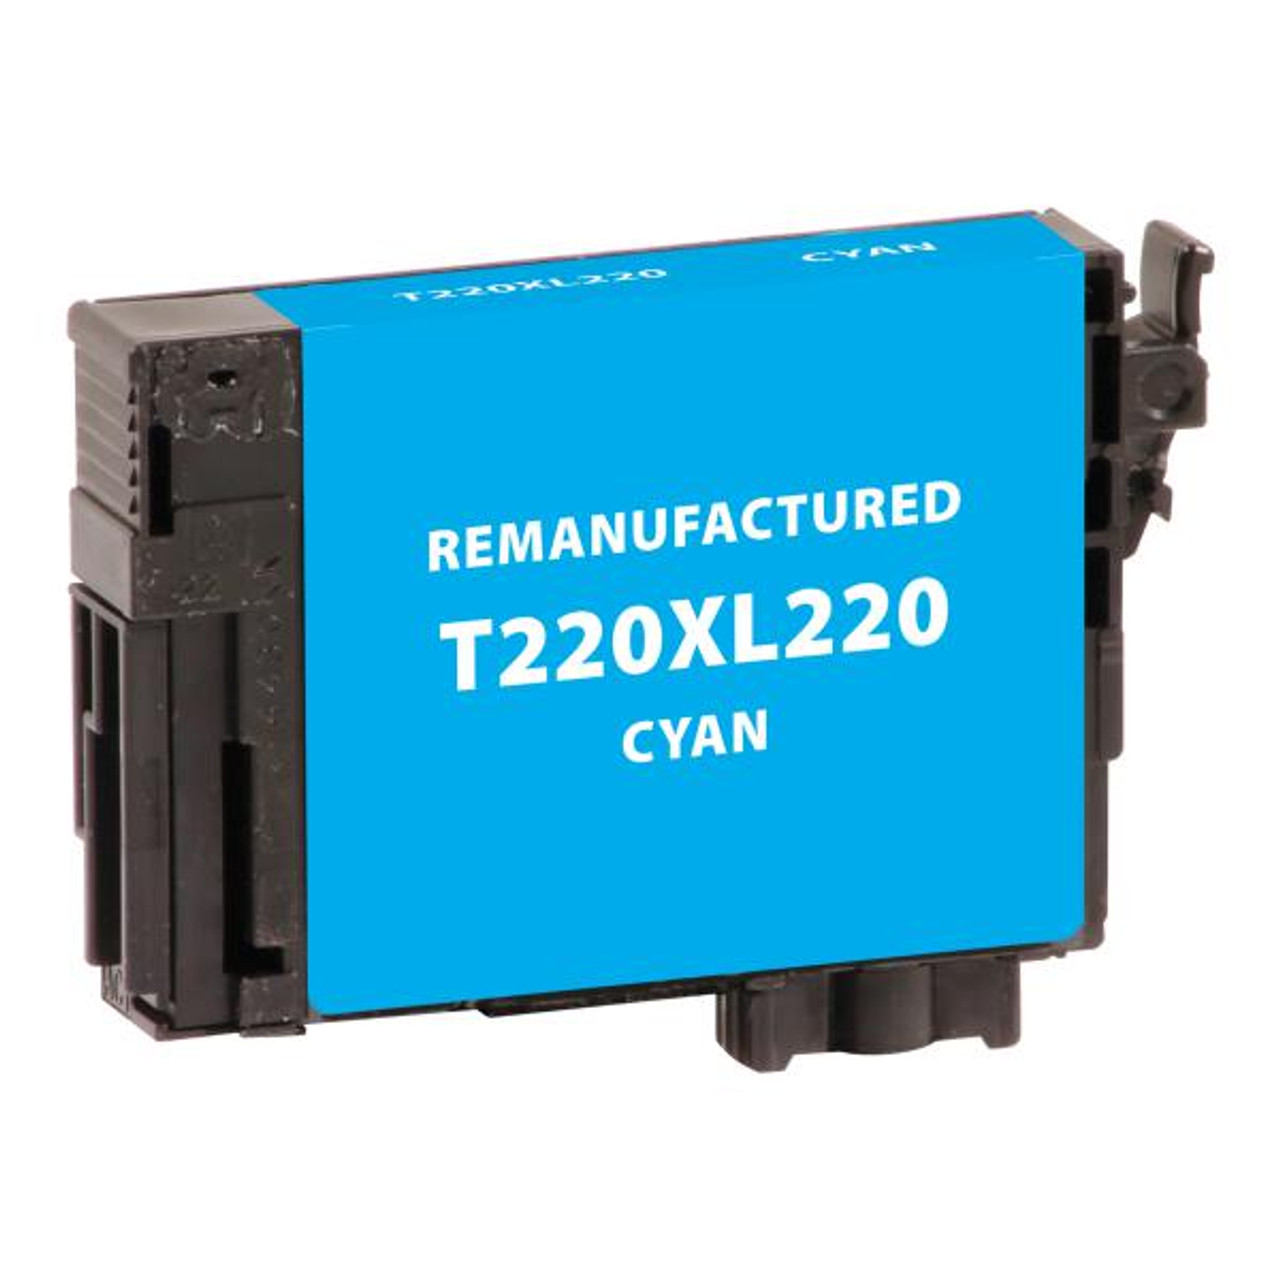 High Capacity Cyan Ink Cartridge for Epson T220XL220-1